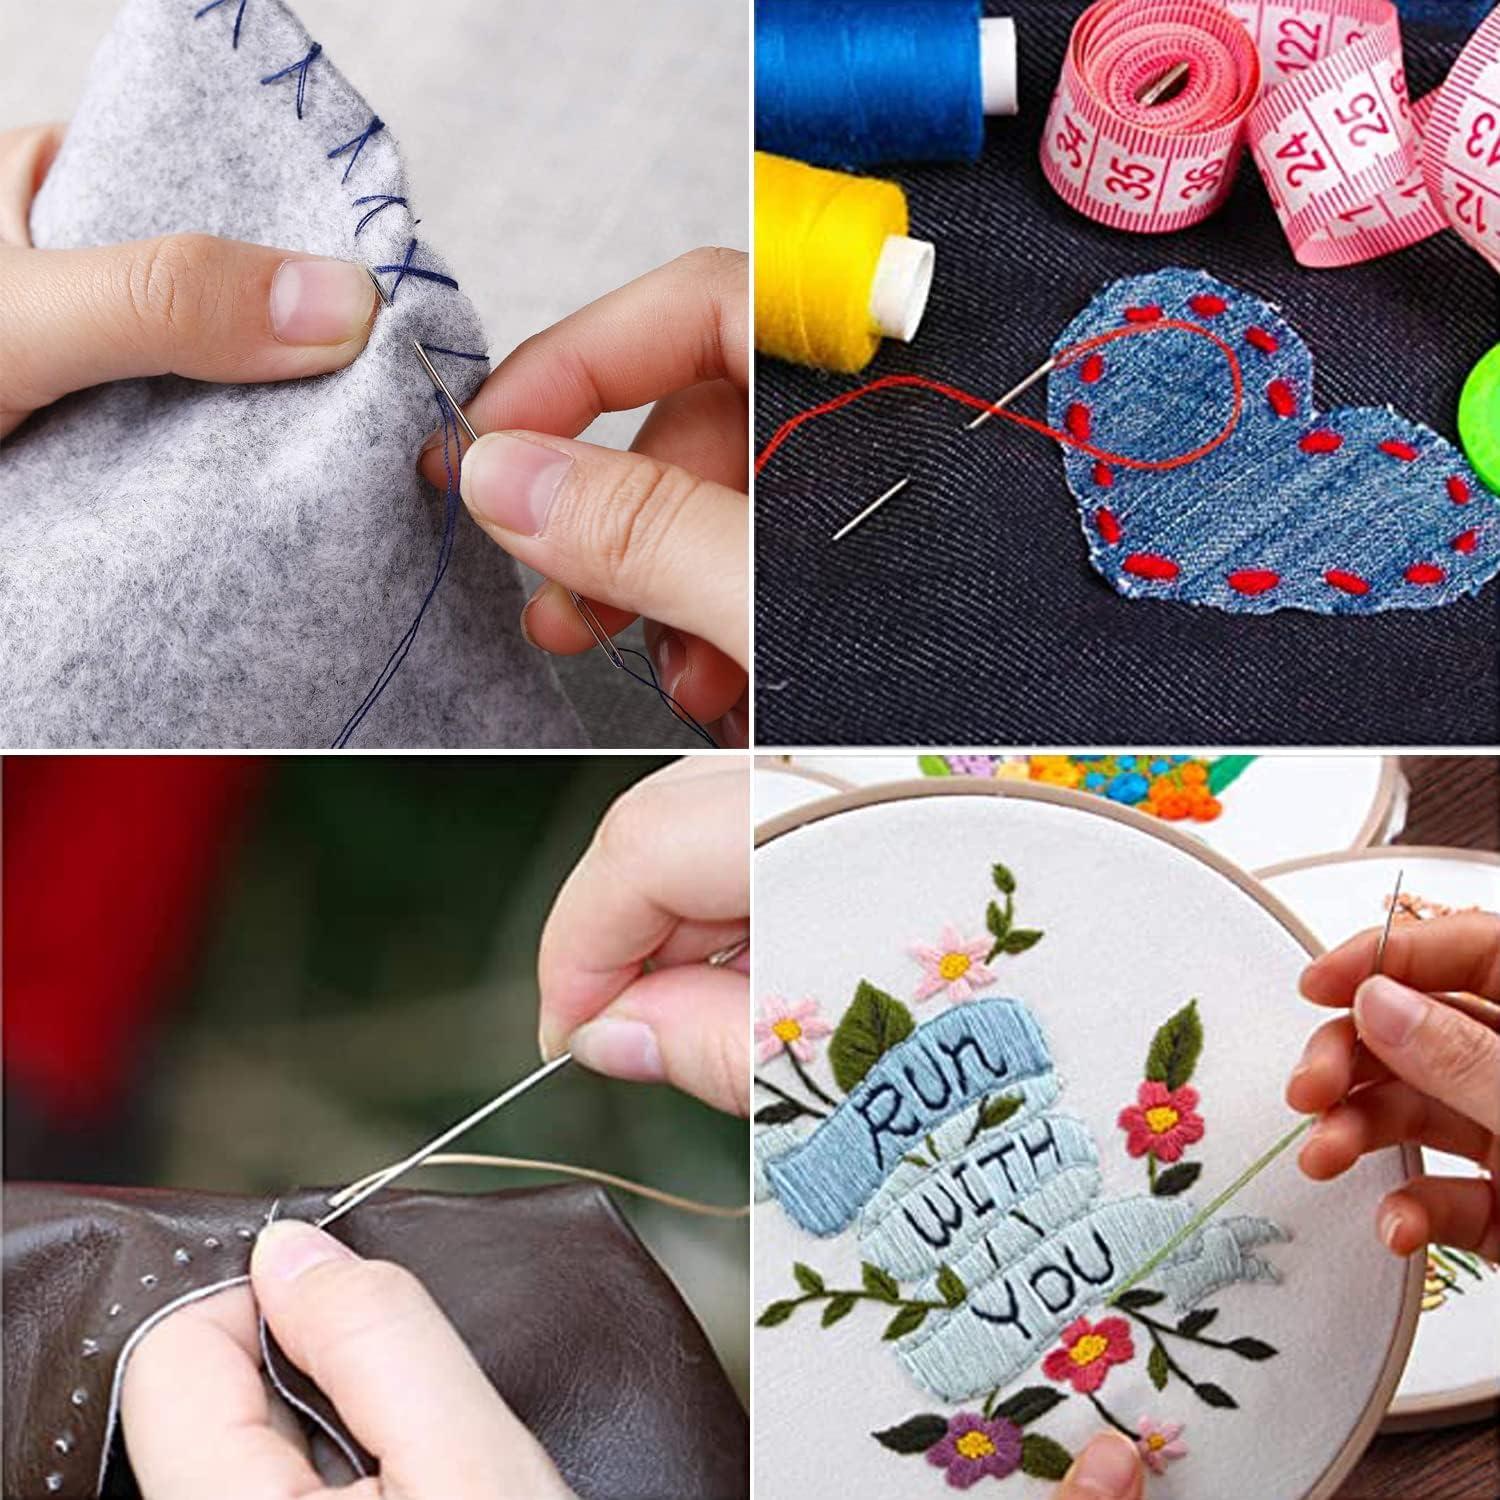 Needle, Sewing, Embroidery, Crafting